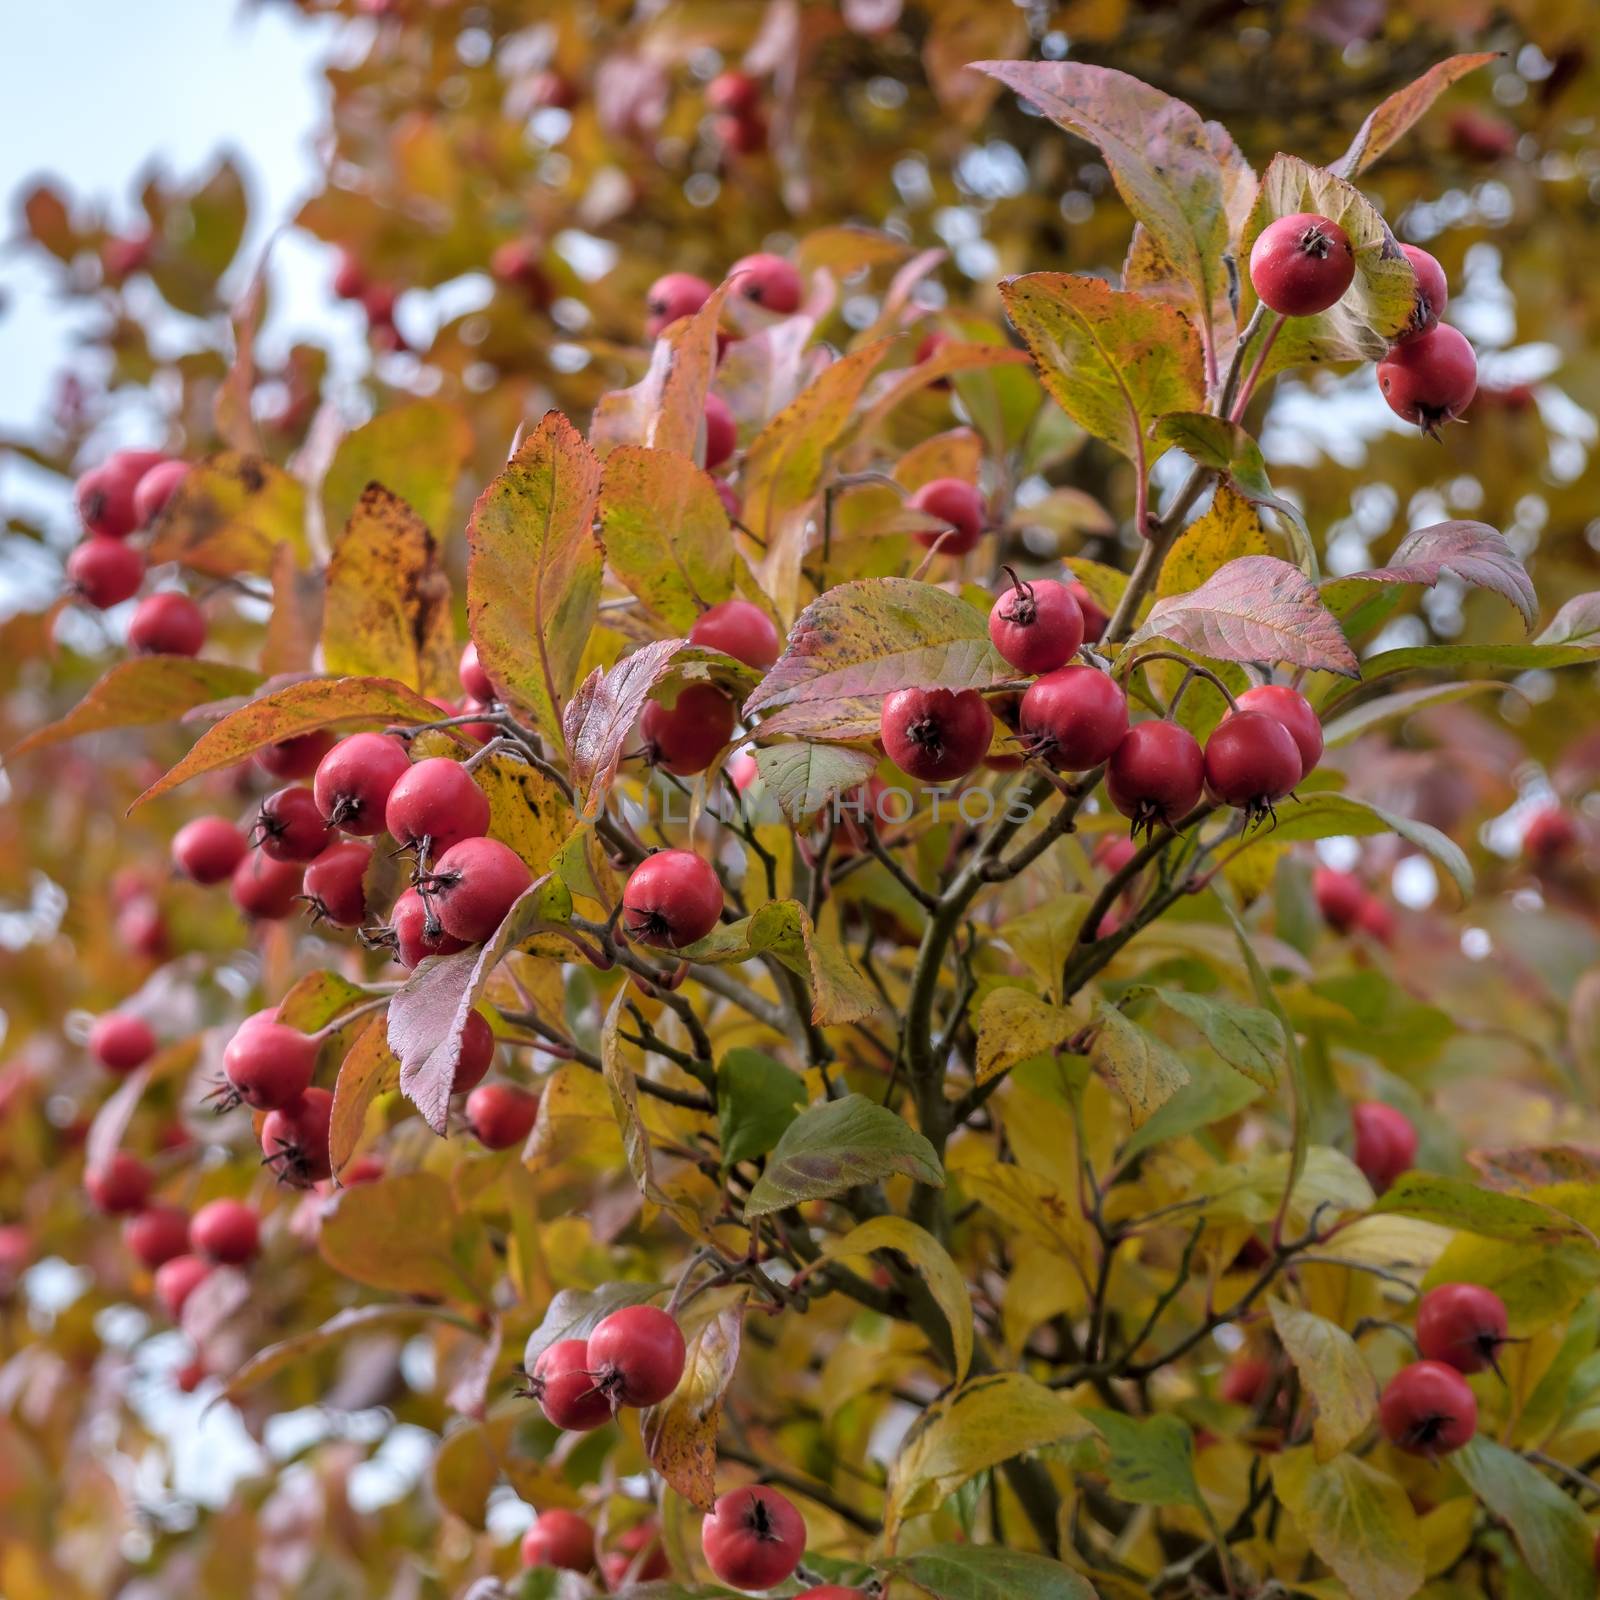 Autumnal colours of the Broad Leaved Cockspur Thorn in East Grinstead